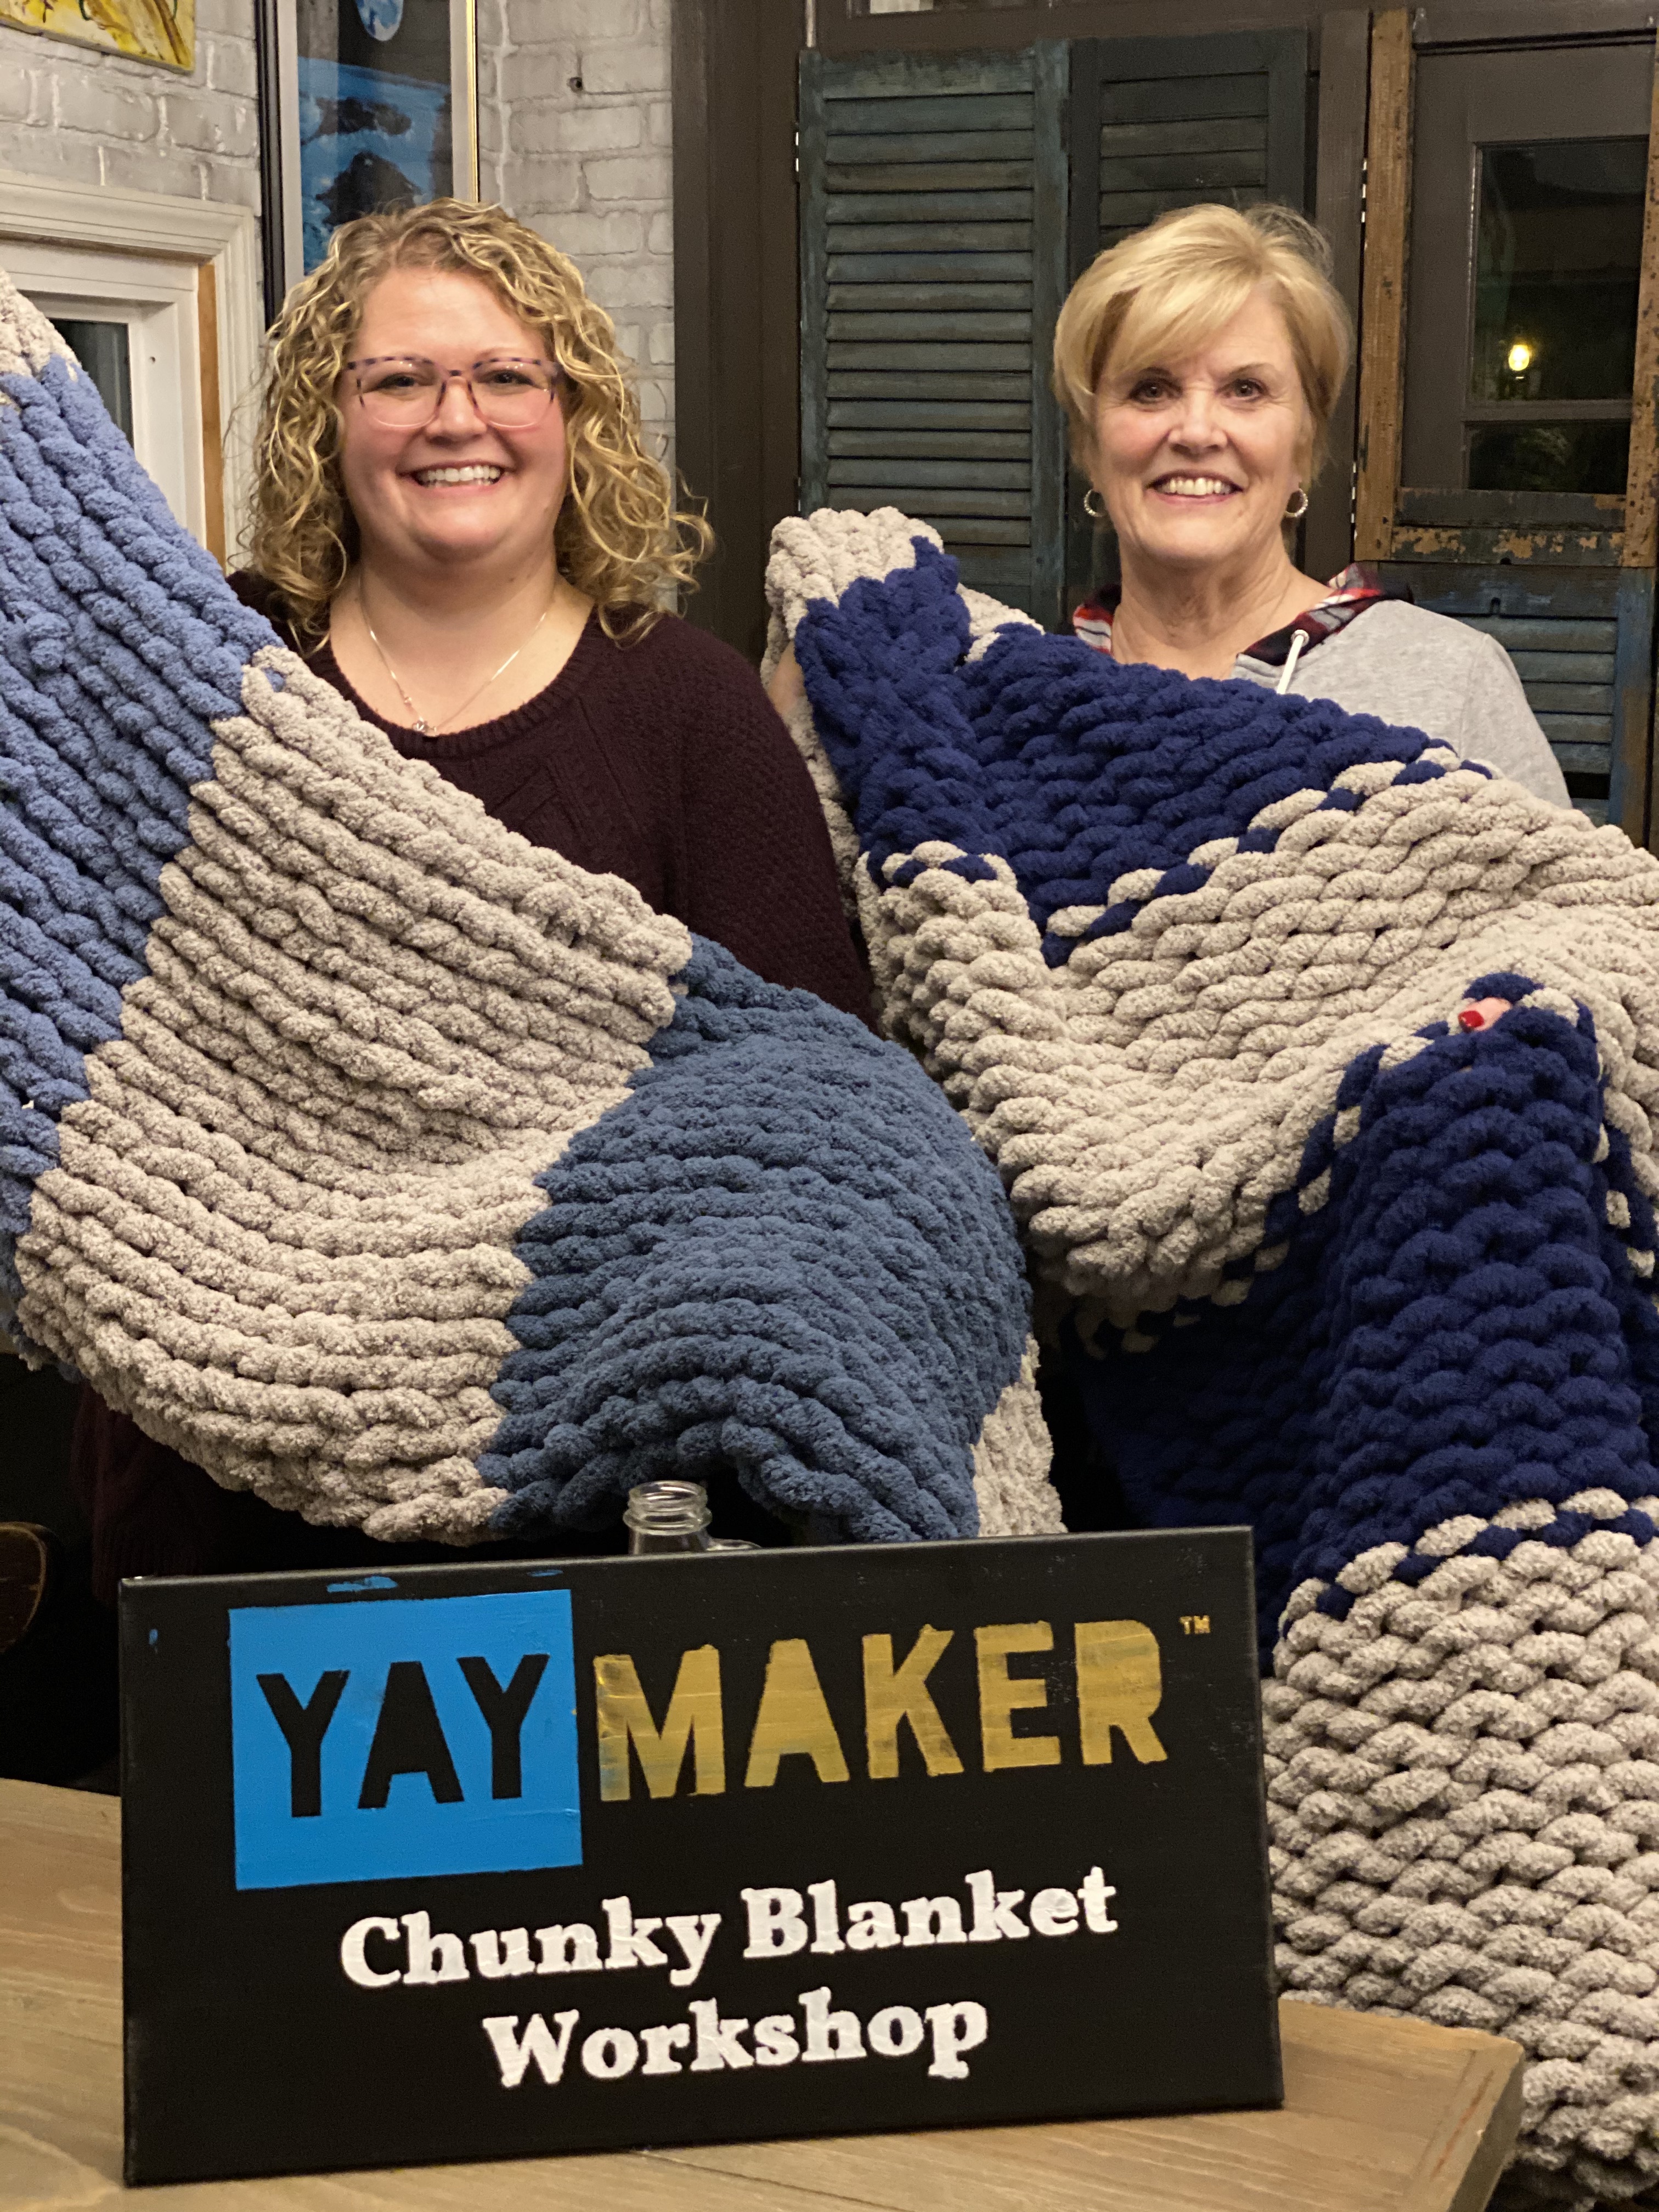 A Chunky Blanket Making with Friends experience project by Yaymaker